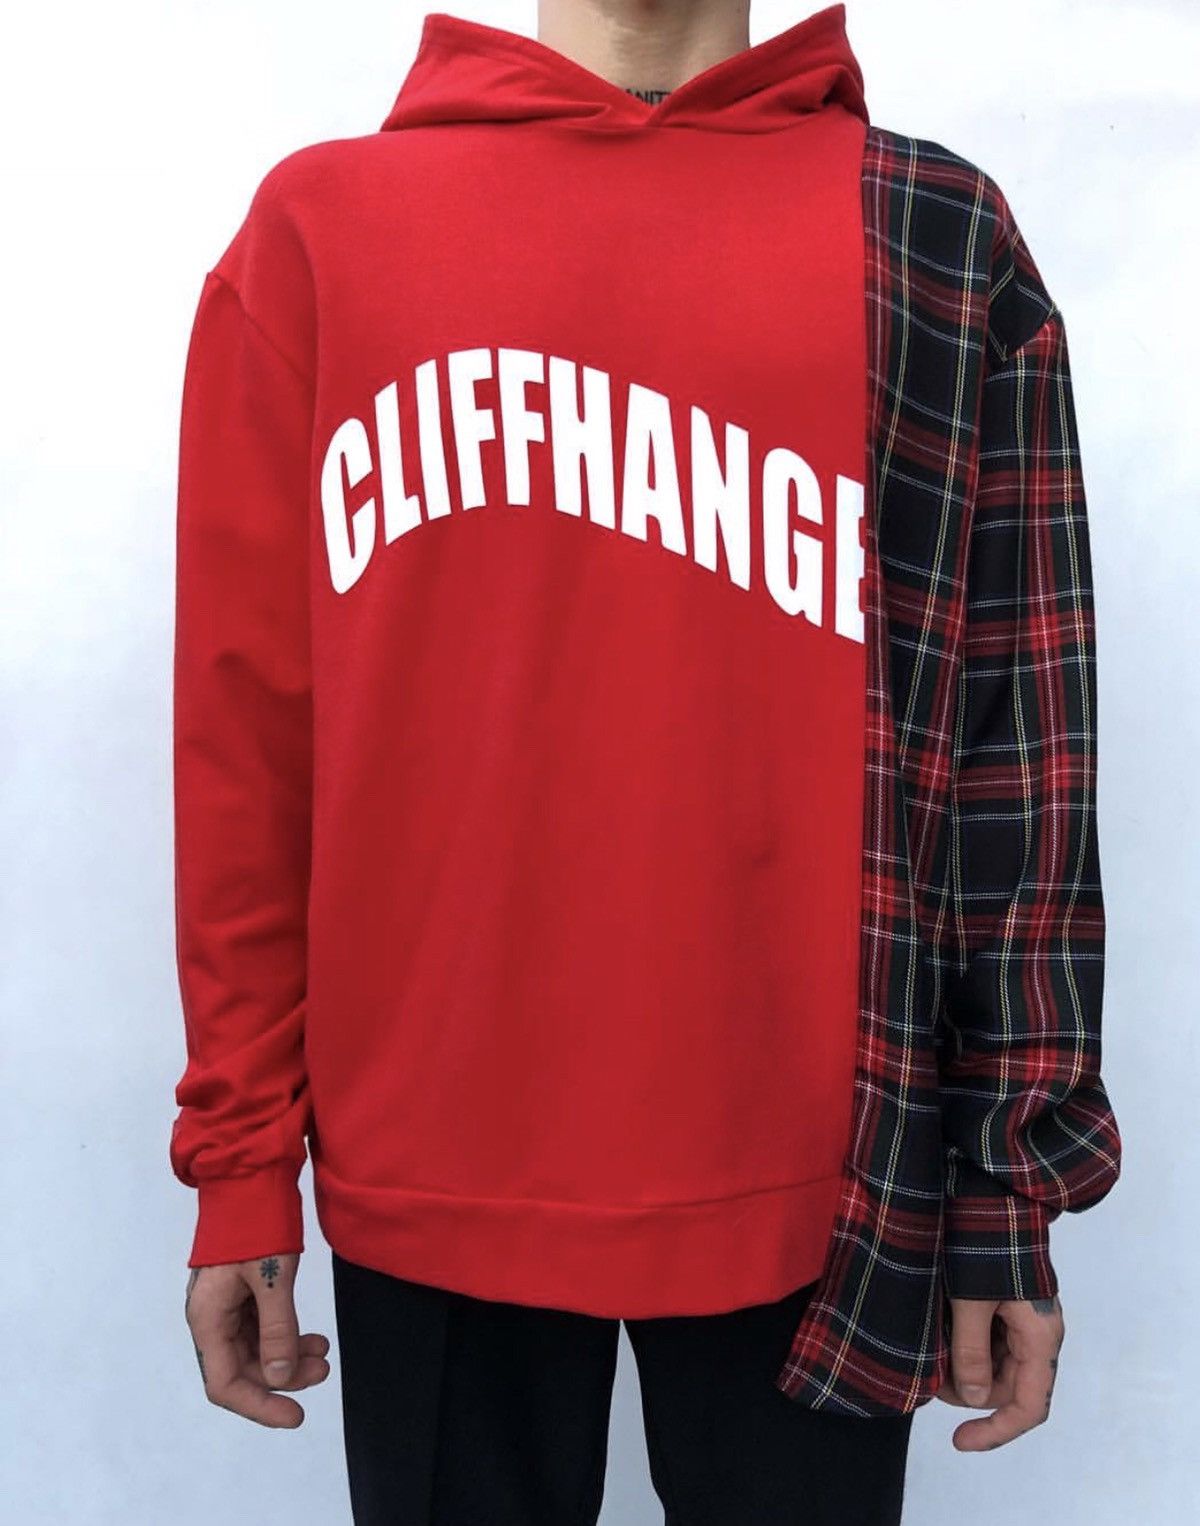 Other Red cliffhanger hoodie Size US L / EU 52-54 / 3 - 4 Thumbnail